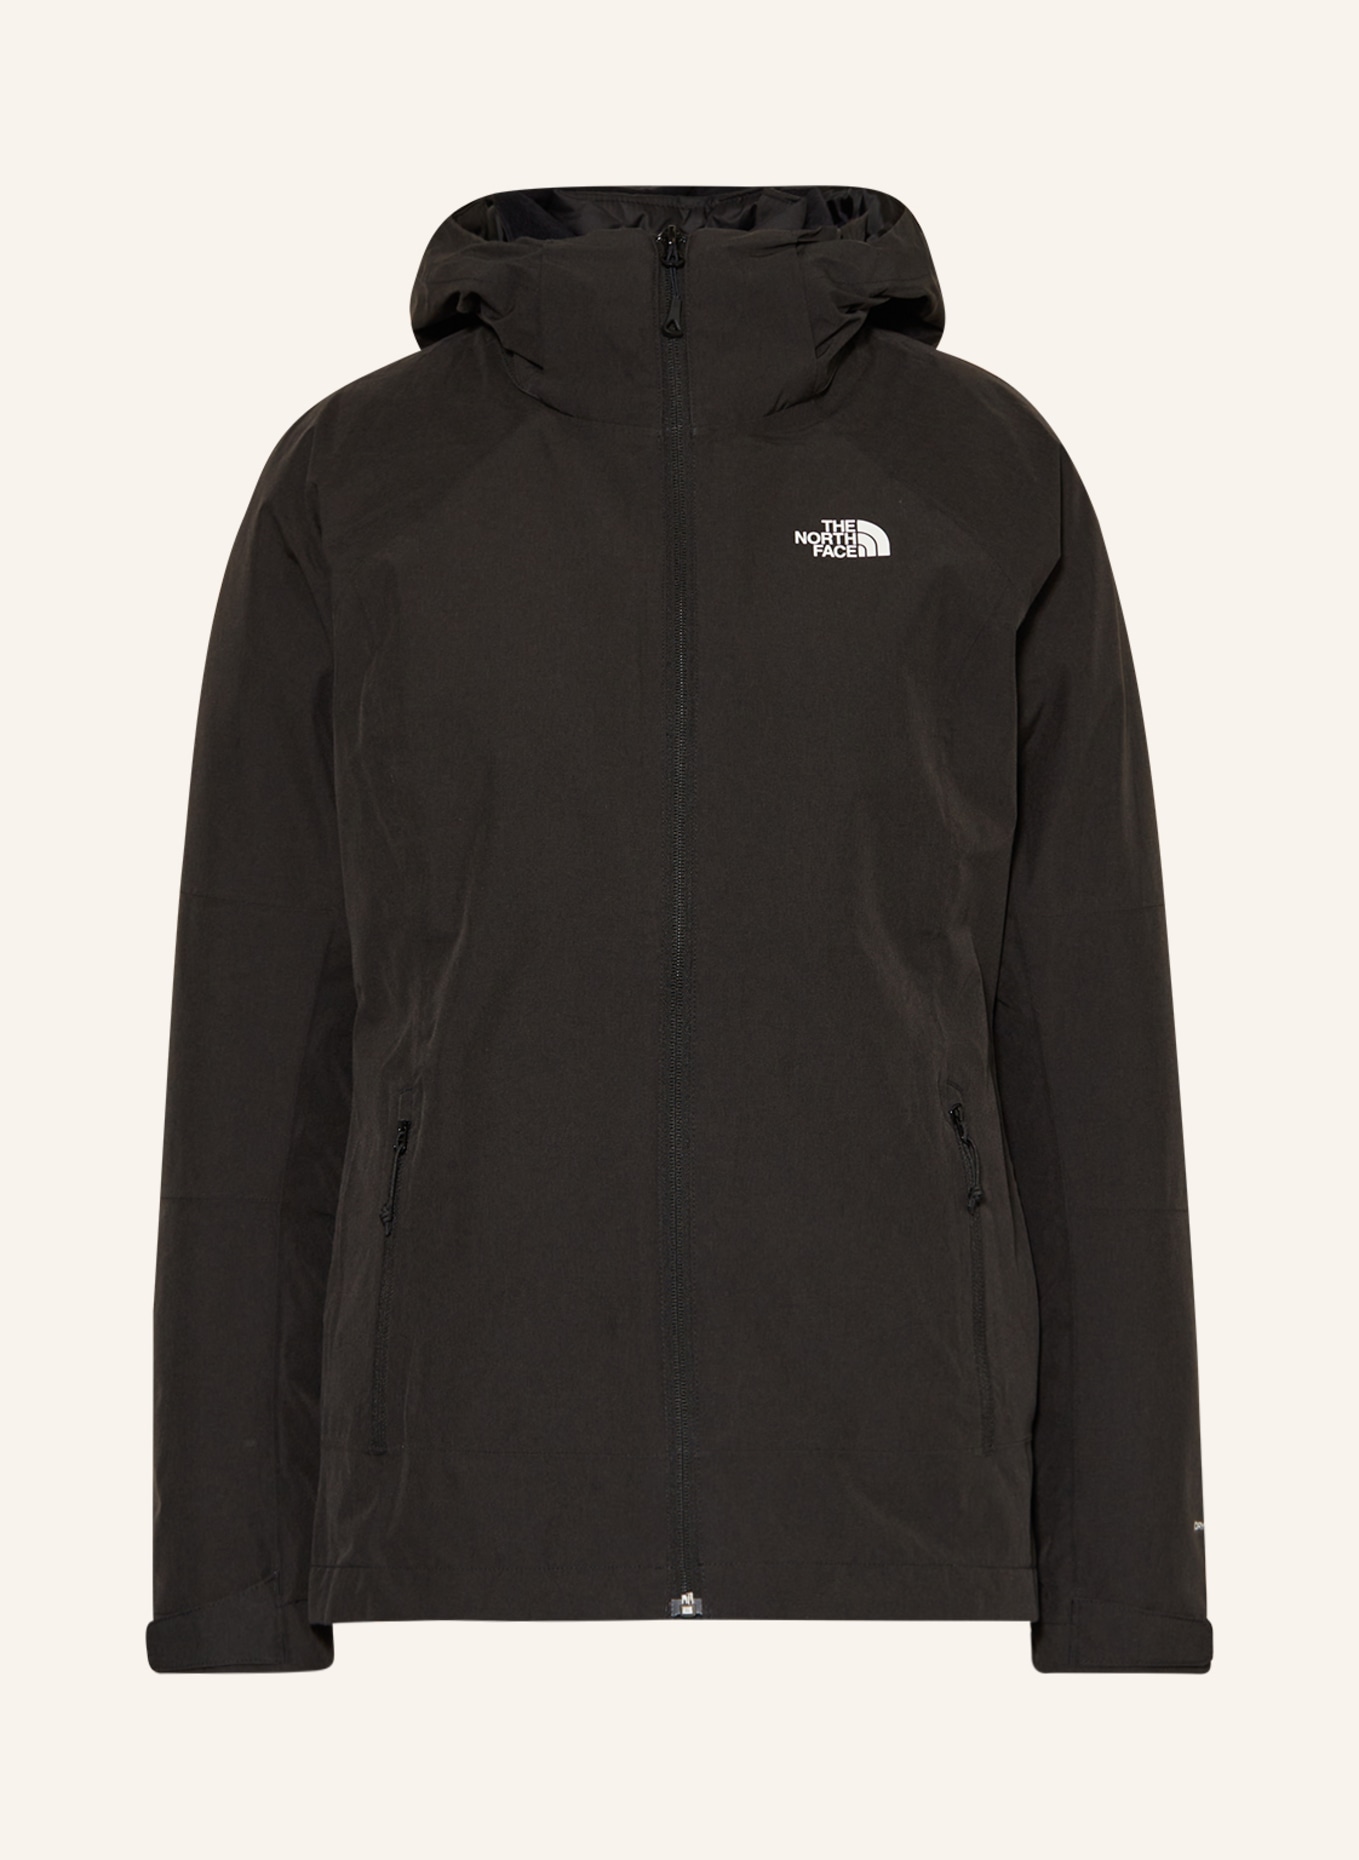 THE NORTH FACE 3-in-1-Jacke INLUX TRICLIMATE®, Farbe: SCHWARZ (Bild 1)